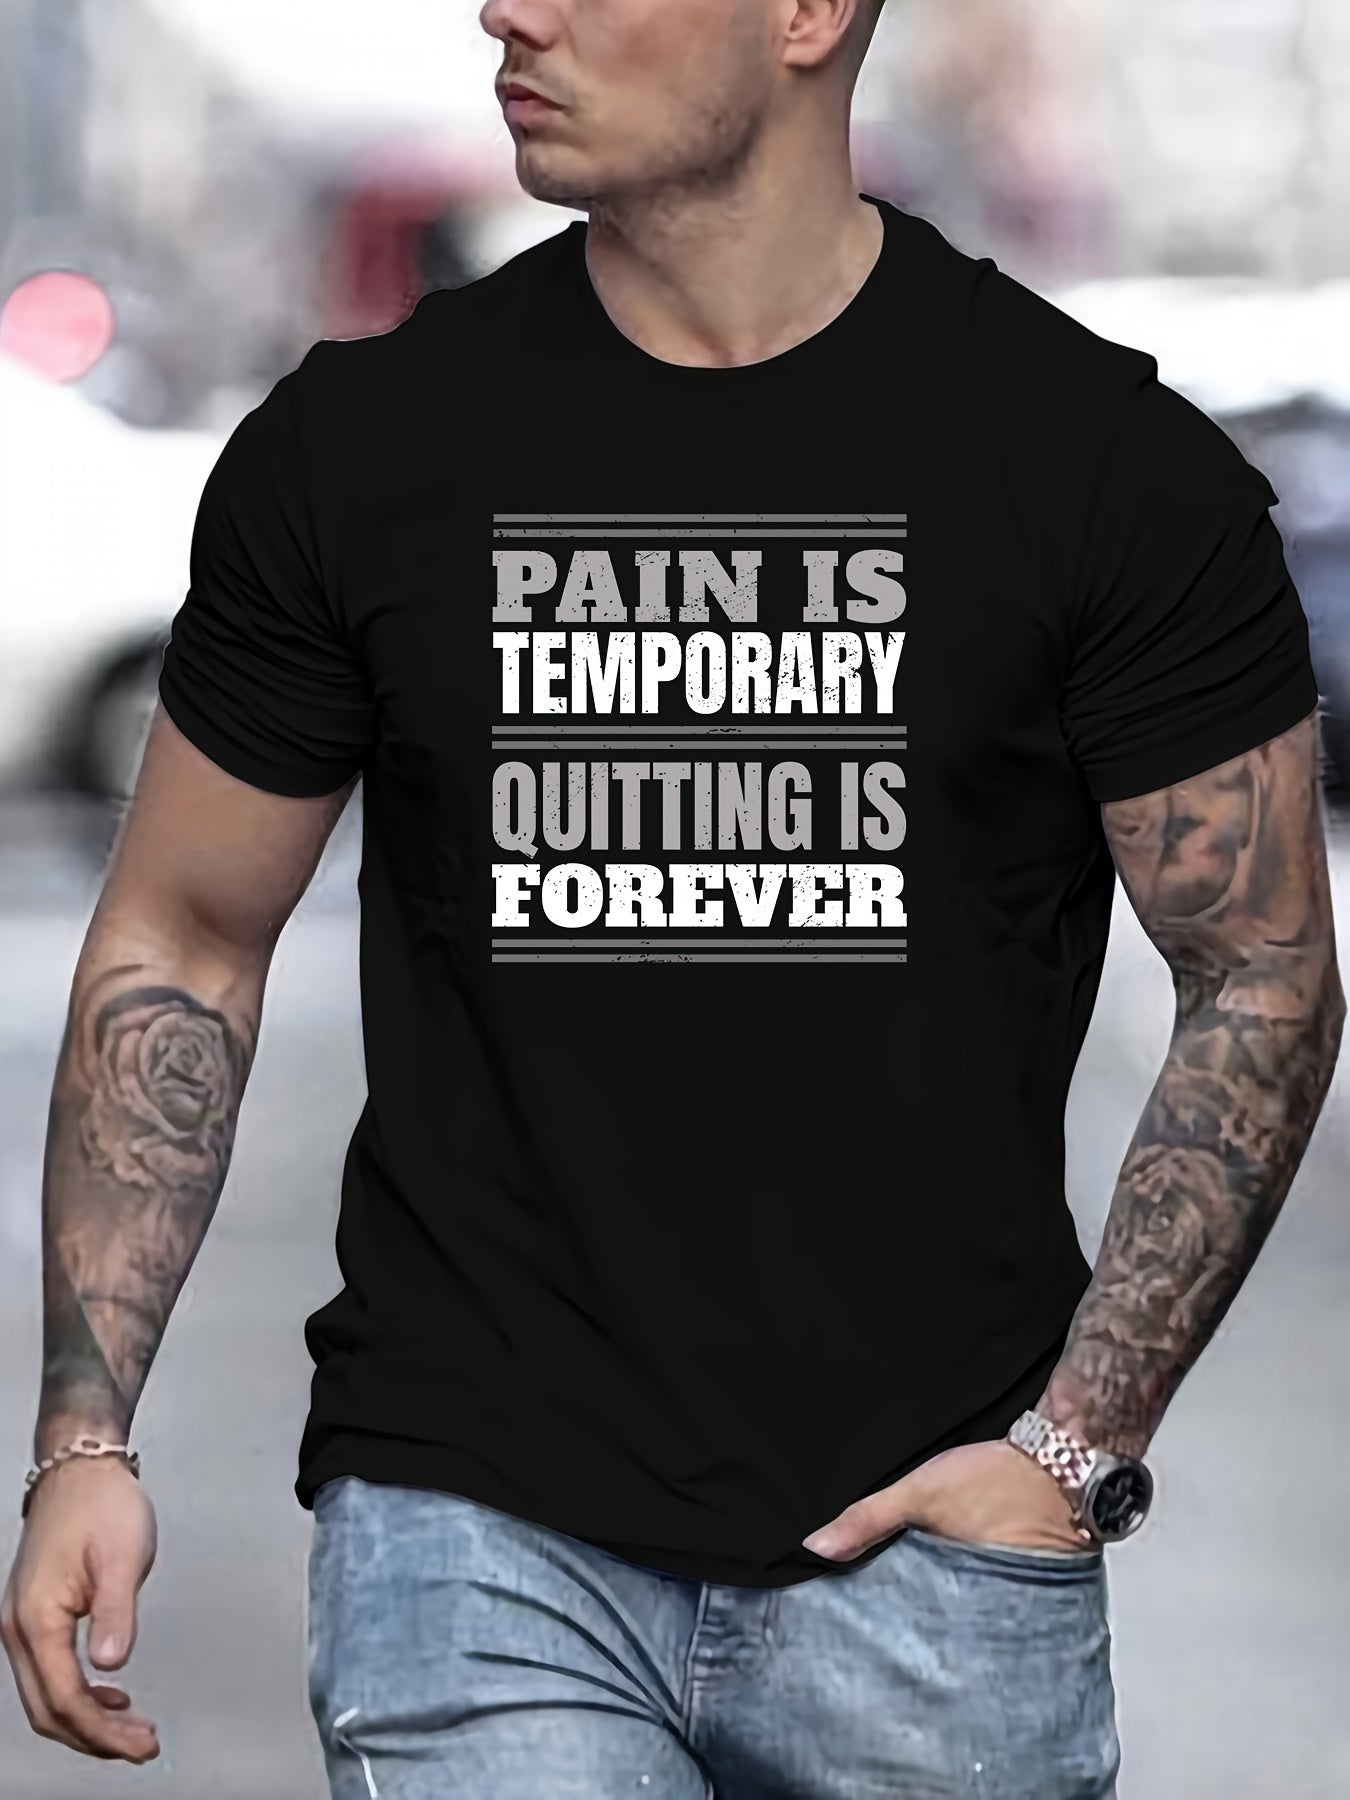 PAIN IS TEMPORARY... Print T Shirt, Tees For Men, Casual Short Sleeve T-shirt For Summer claimedbygoddesigns